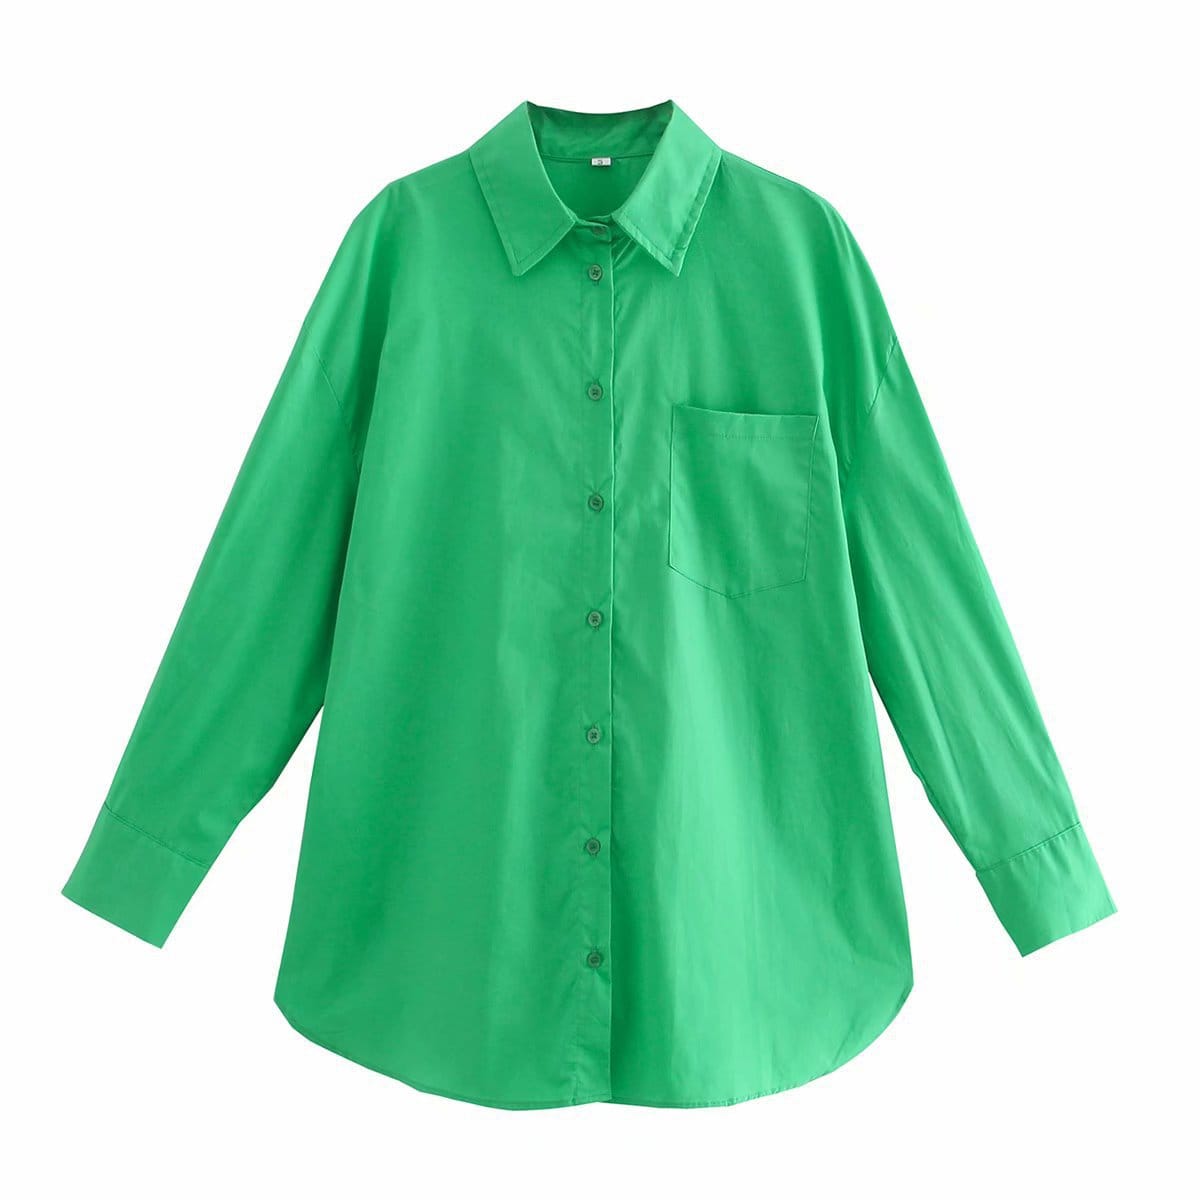 Lovemi - Solid Color Casual Shirt Girls Top